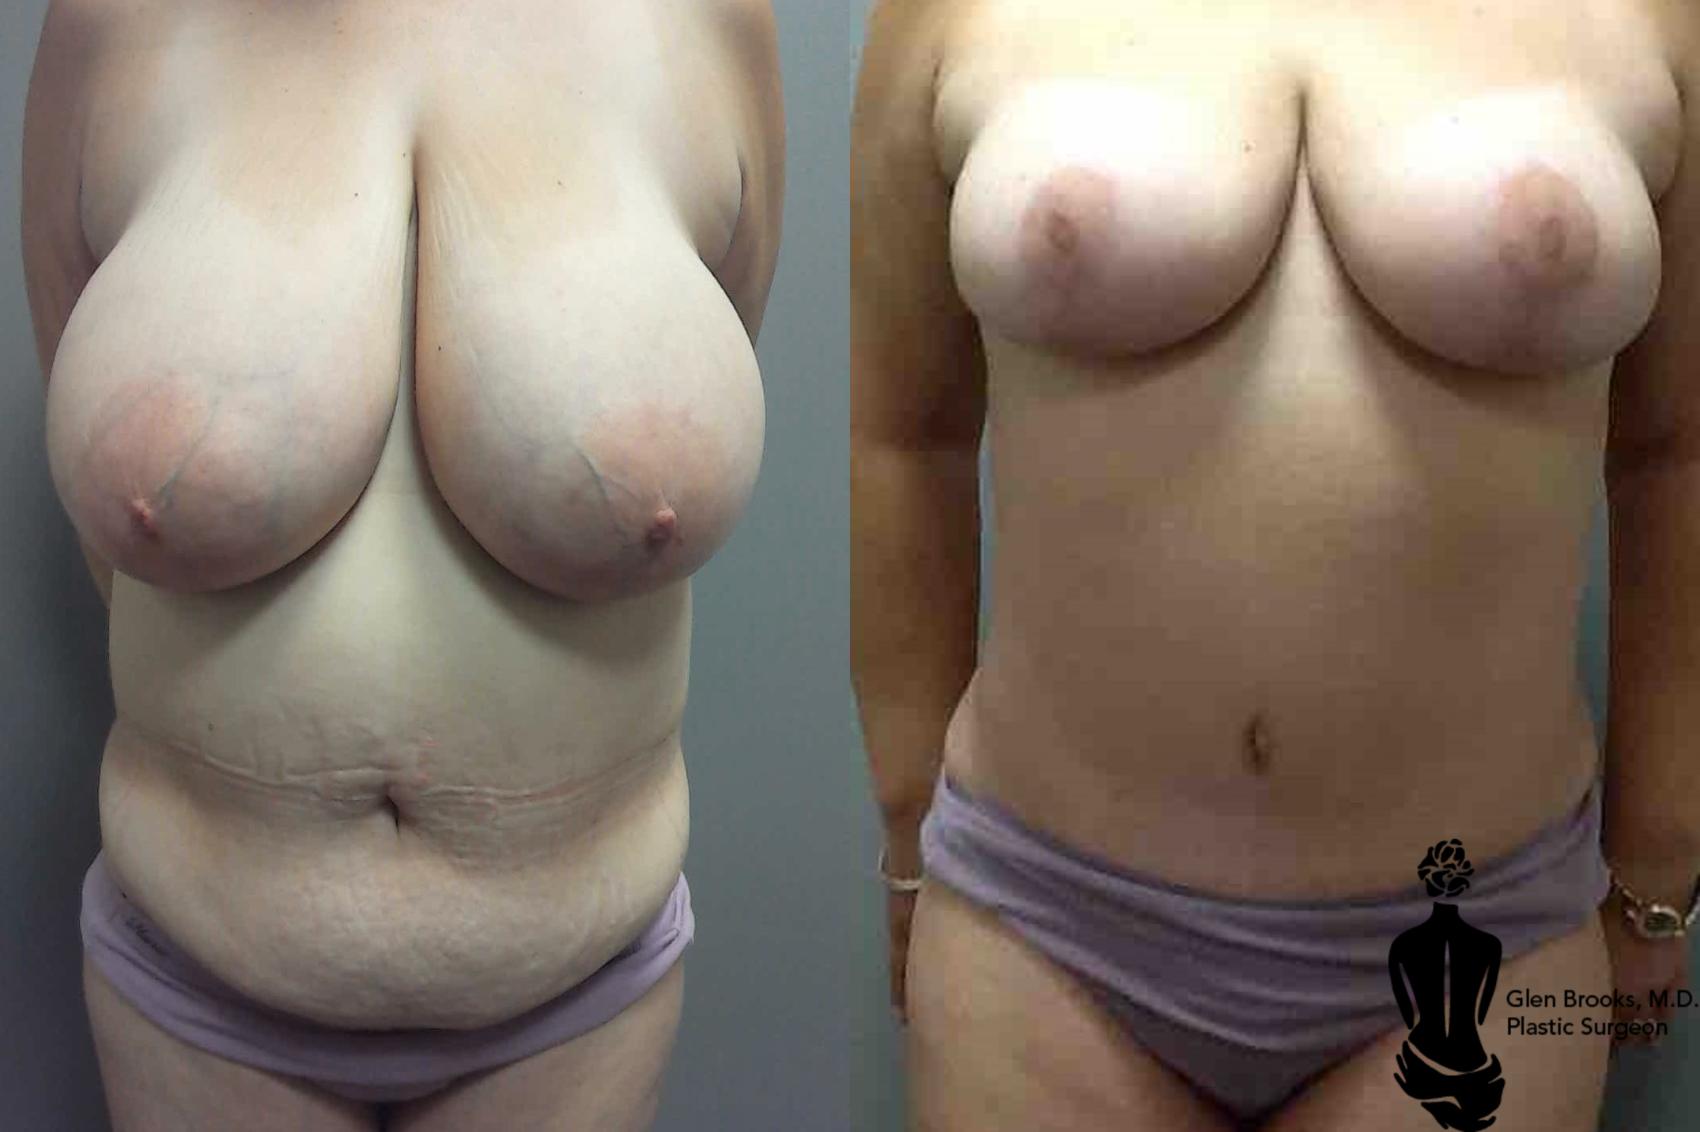 Abdominoplasty Before & After Photo | Springfield, MA | Aesthetic Plastic & Reconstructive Surgery